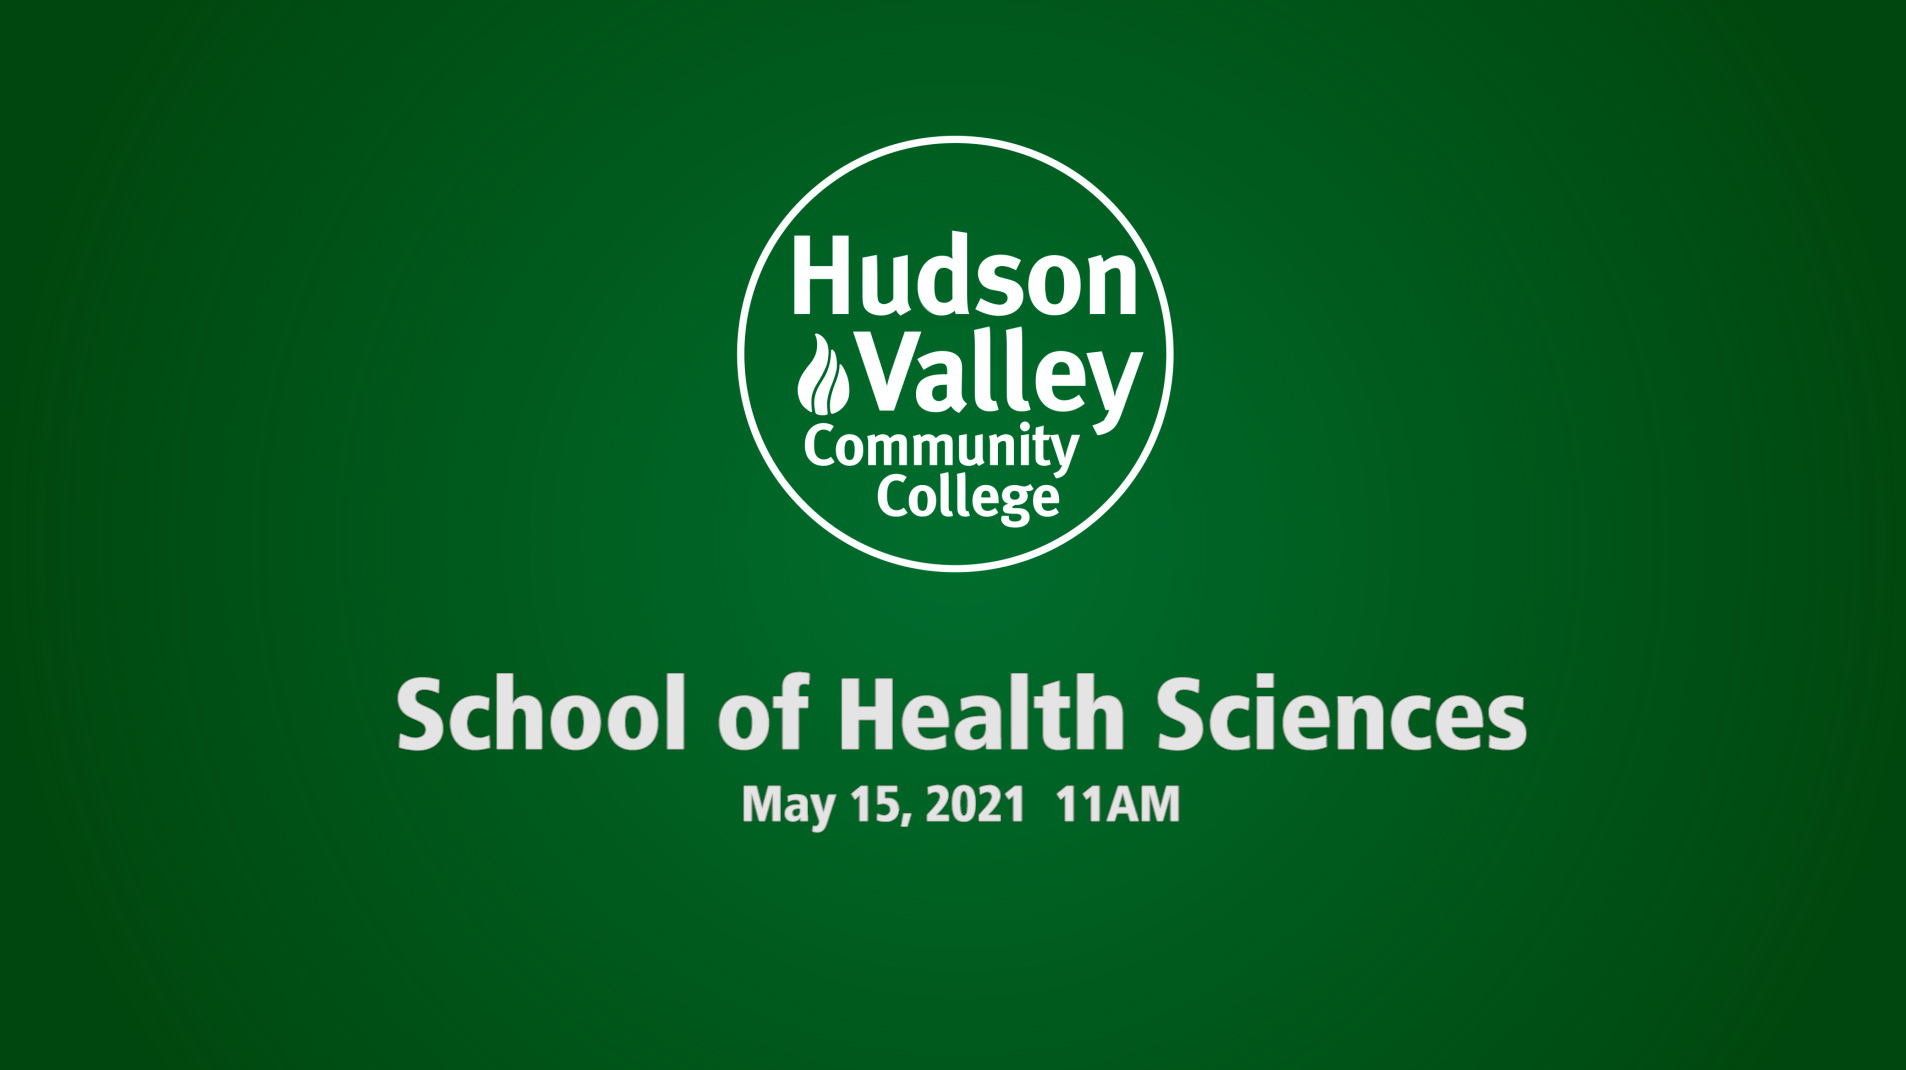 Hudson Valley Community College Commencement Ceremony: School of Health